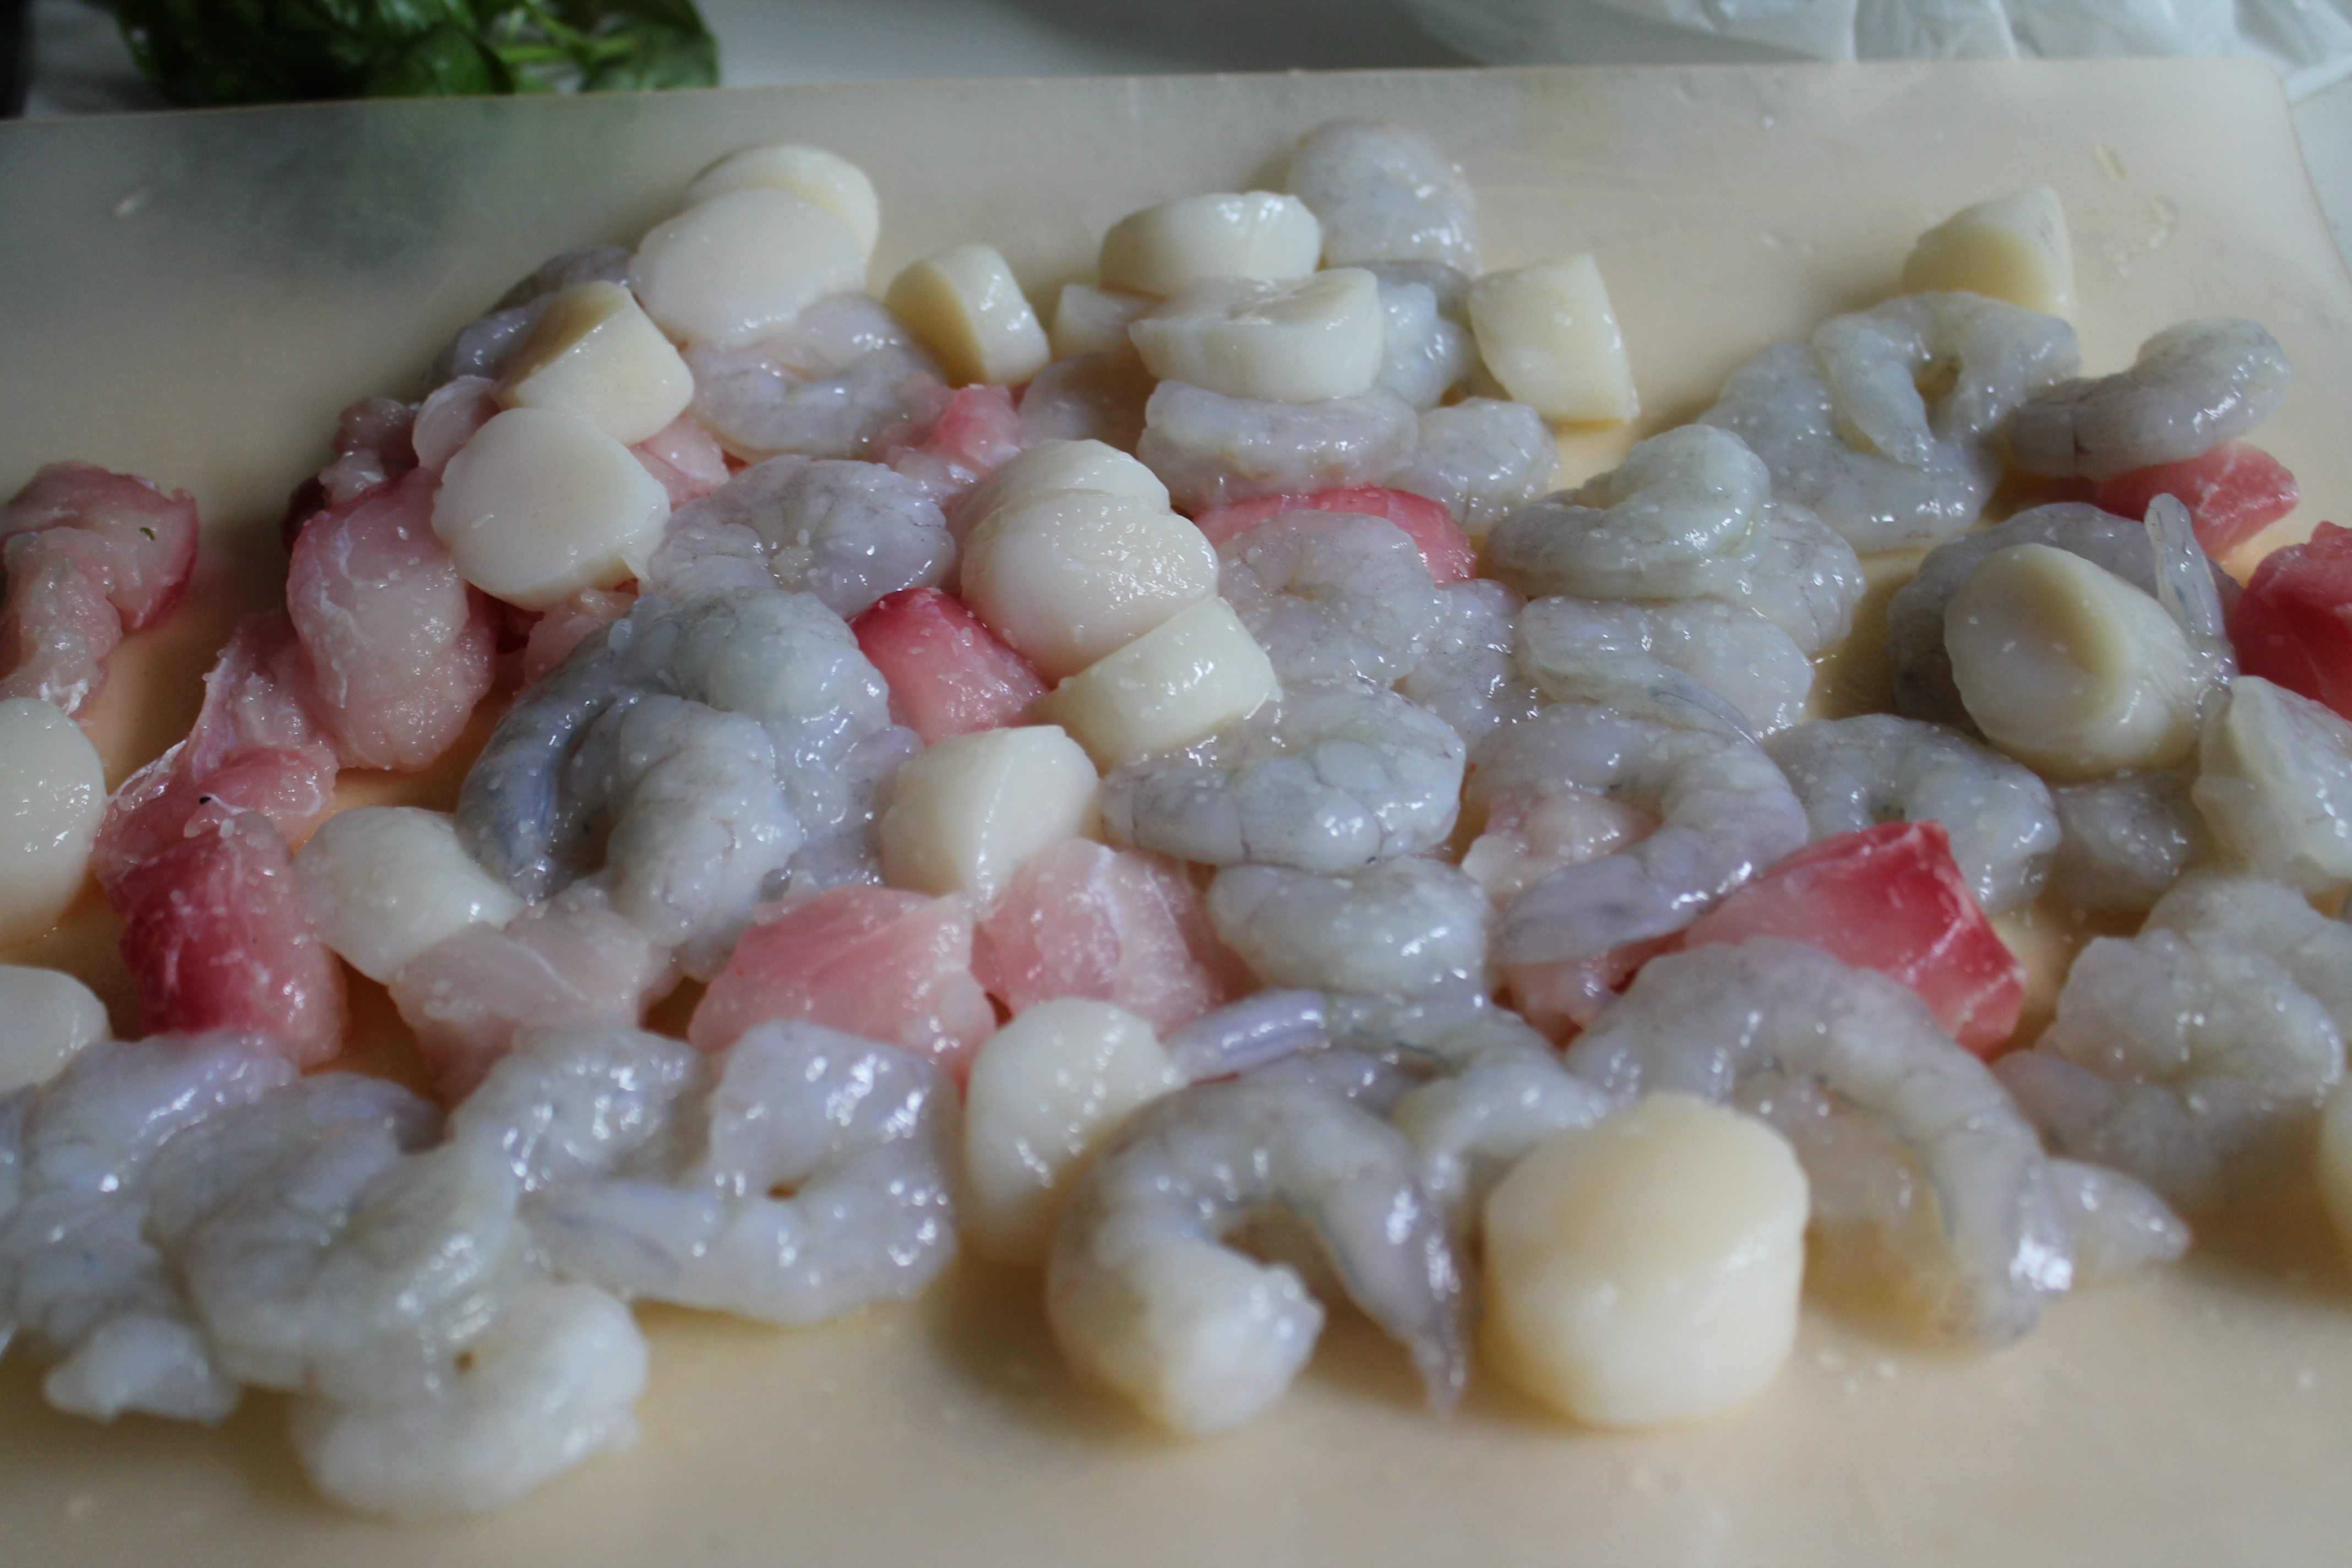 Deveined Shrimp, Scallops, and Red Snapper